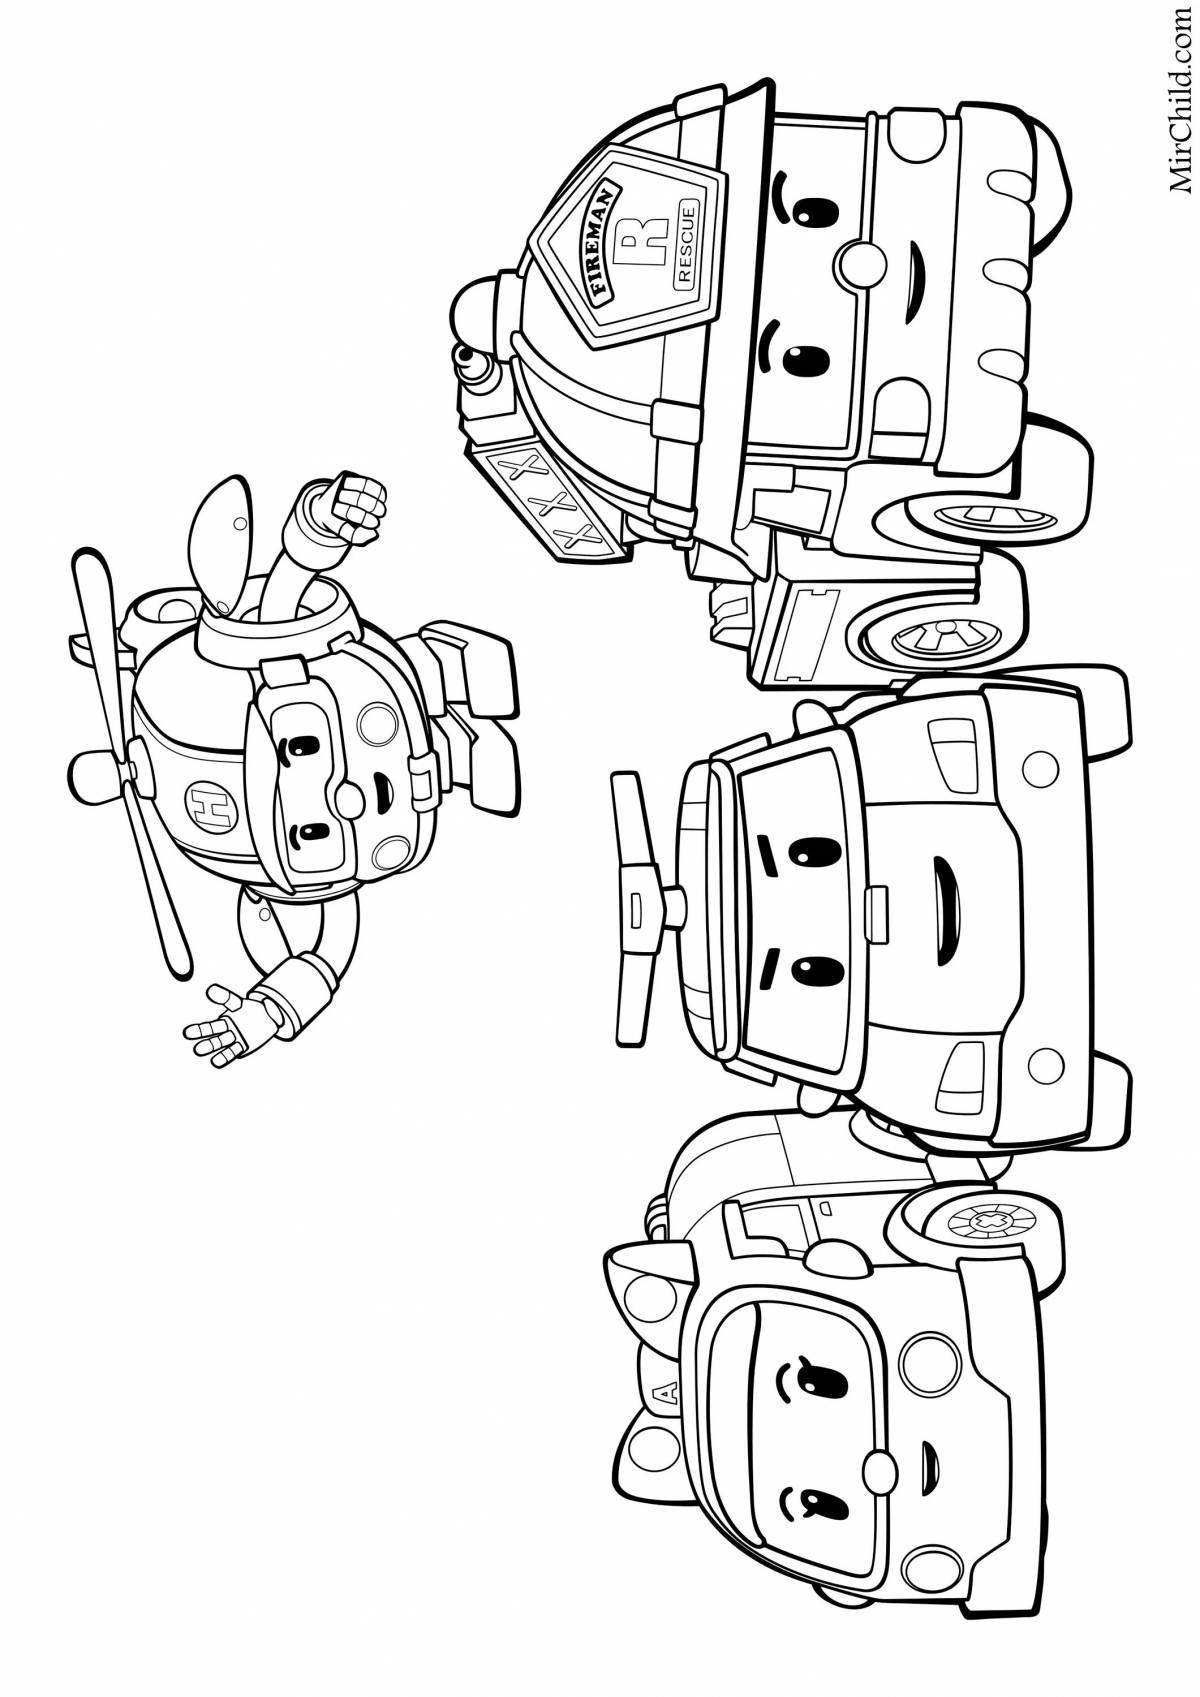 Coloring page charming ember robocar